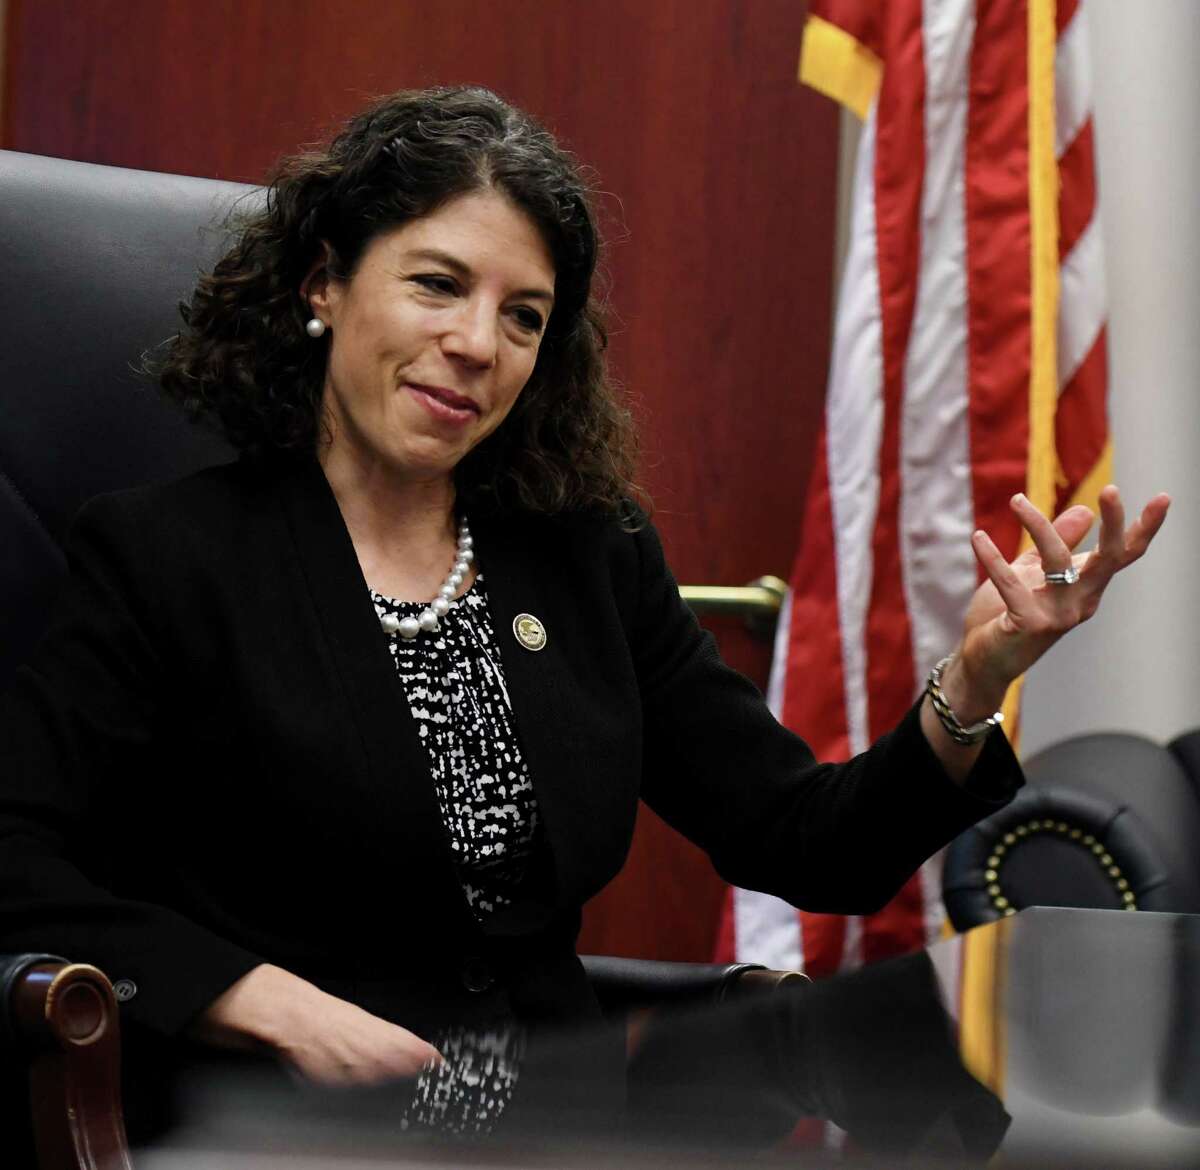 Acting U.S. Attorney Antoinette Bacon is interviewed at her offices on Friday, Oct. 16, 2020, at James T. Foley U.S. Courthouse in Albany, N.Y. She replaced Grant Jaquith as the top federal prosecutor in the 32-county Northern District of New York. (Will Waldron/Times Union)